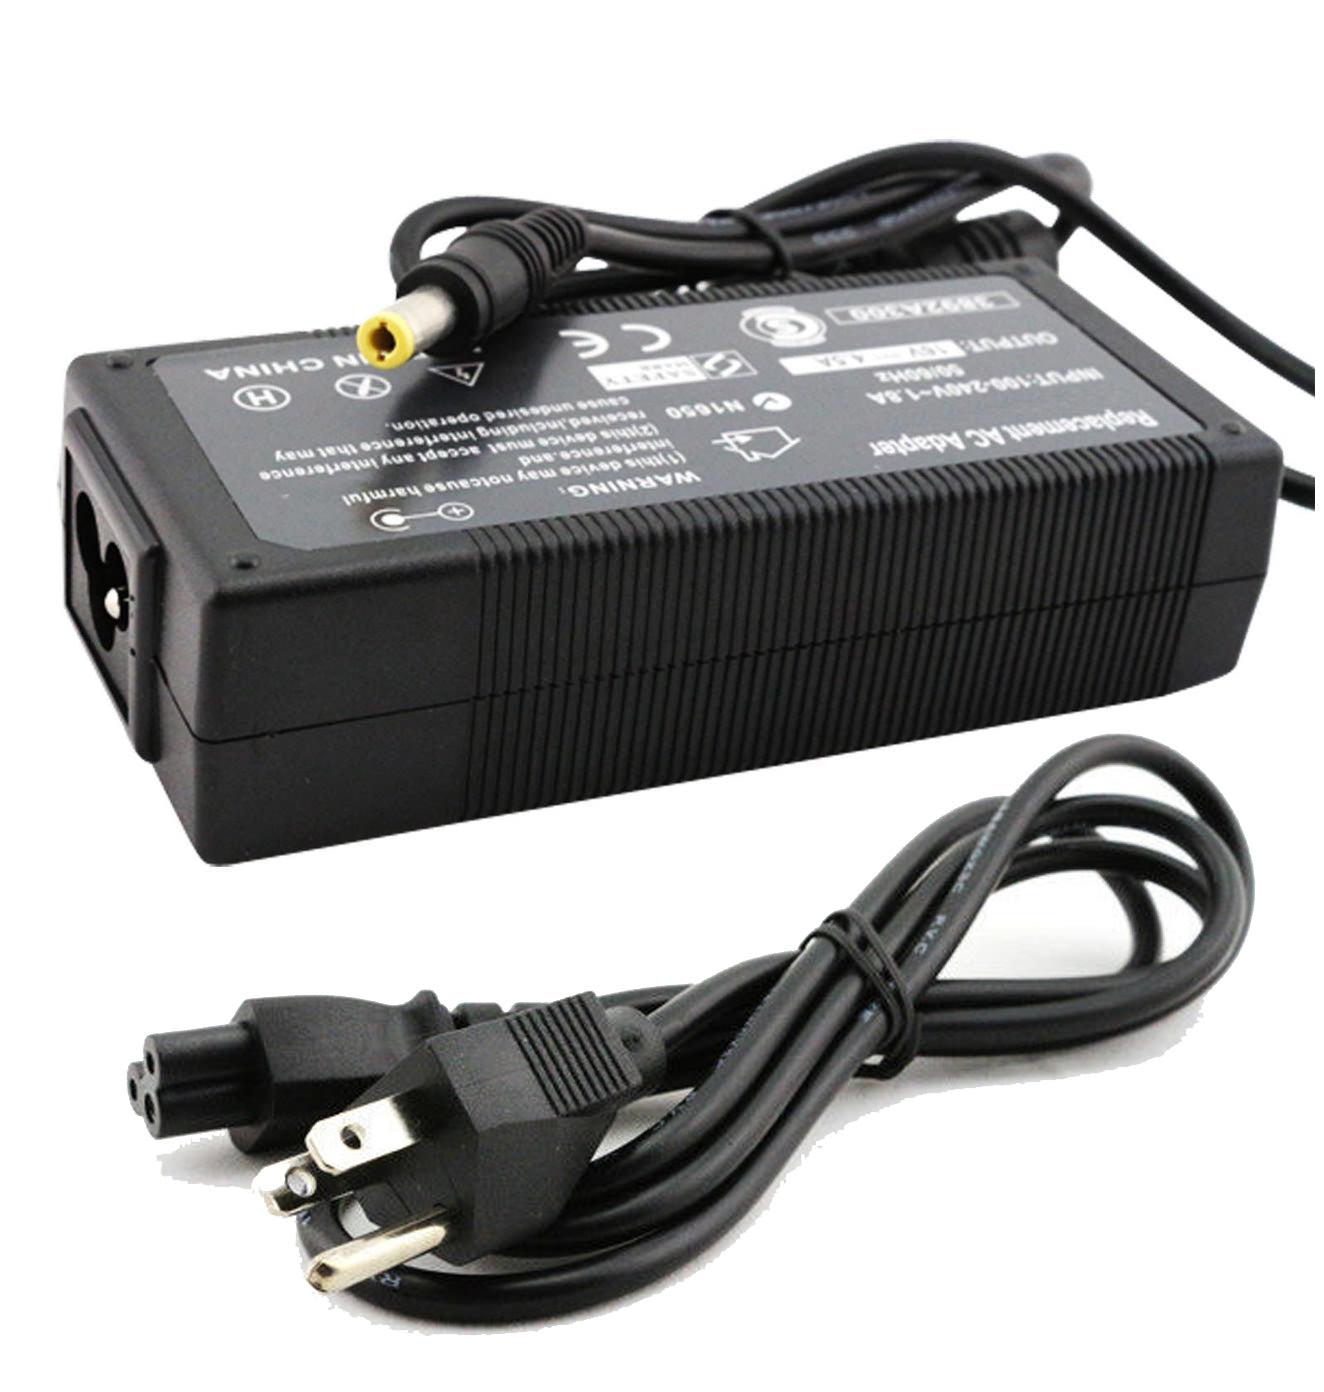 AC Adapter Charger for Panasonic Toughbook CF-T1 Notebook.